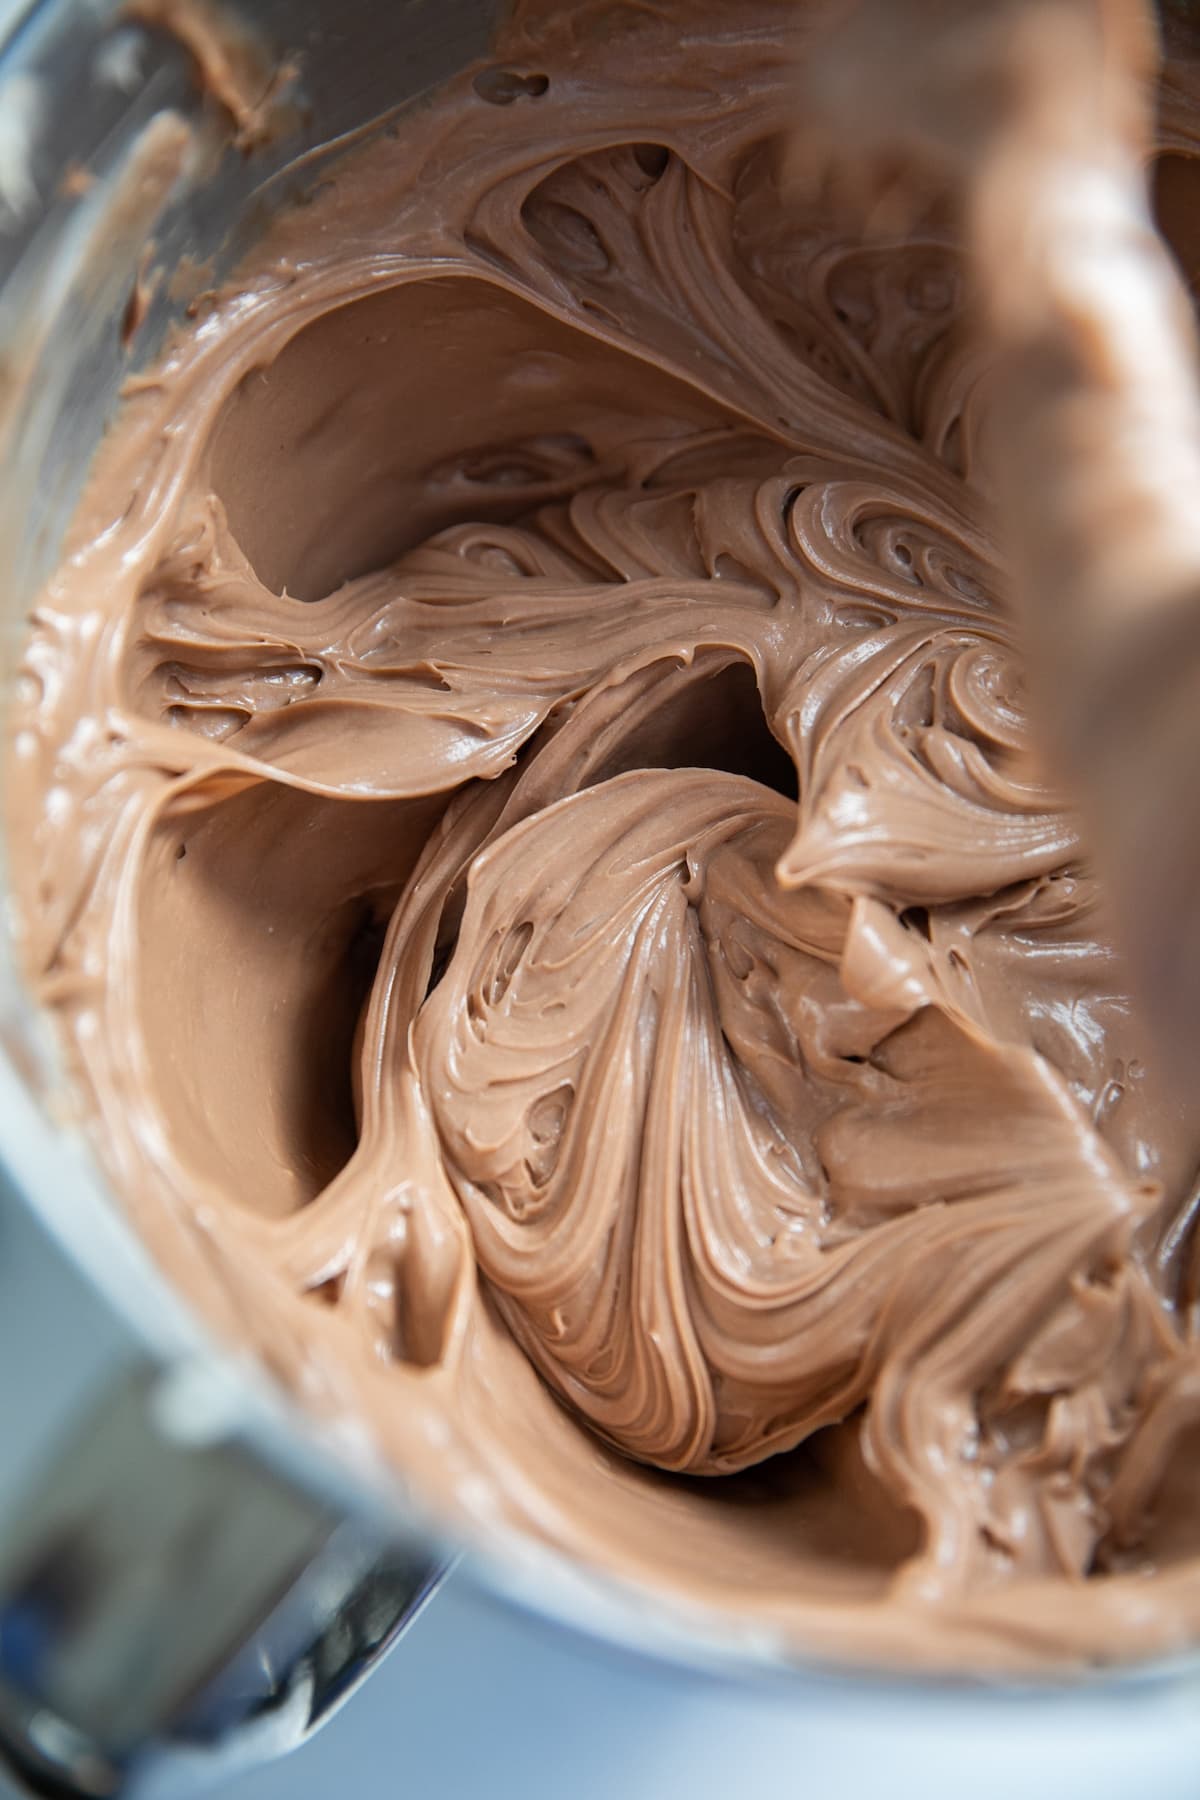 nutella cheesecake batter in bowl